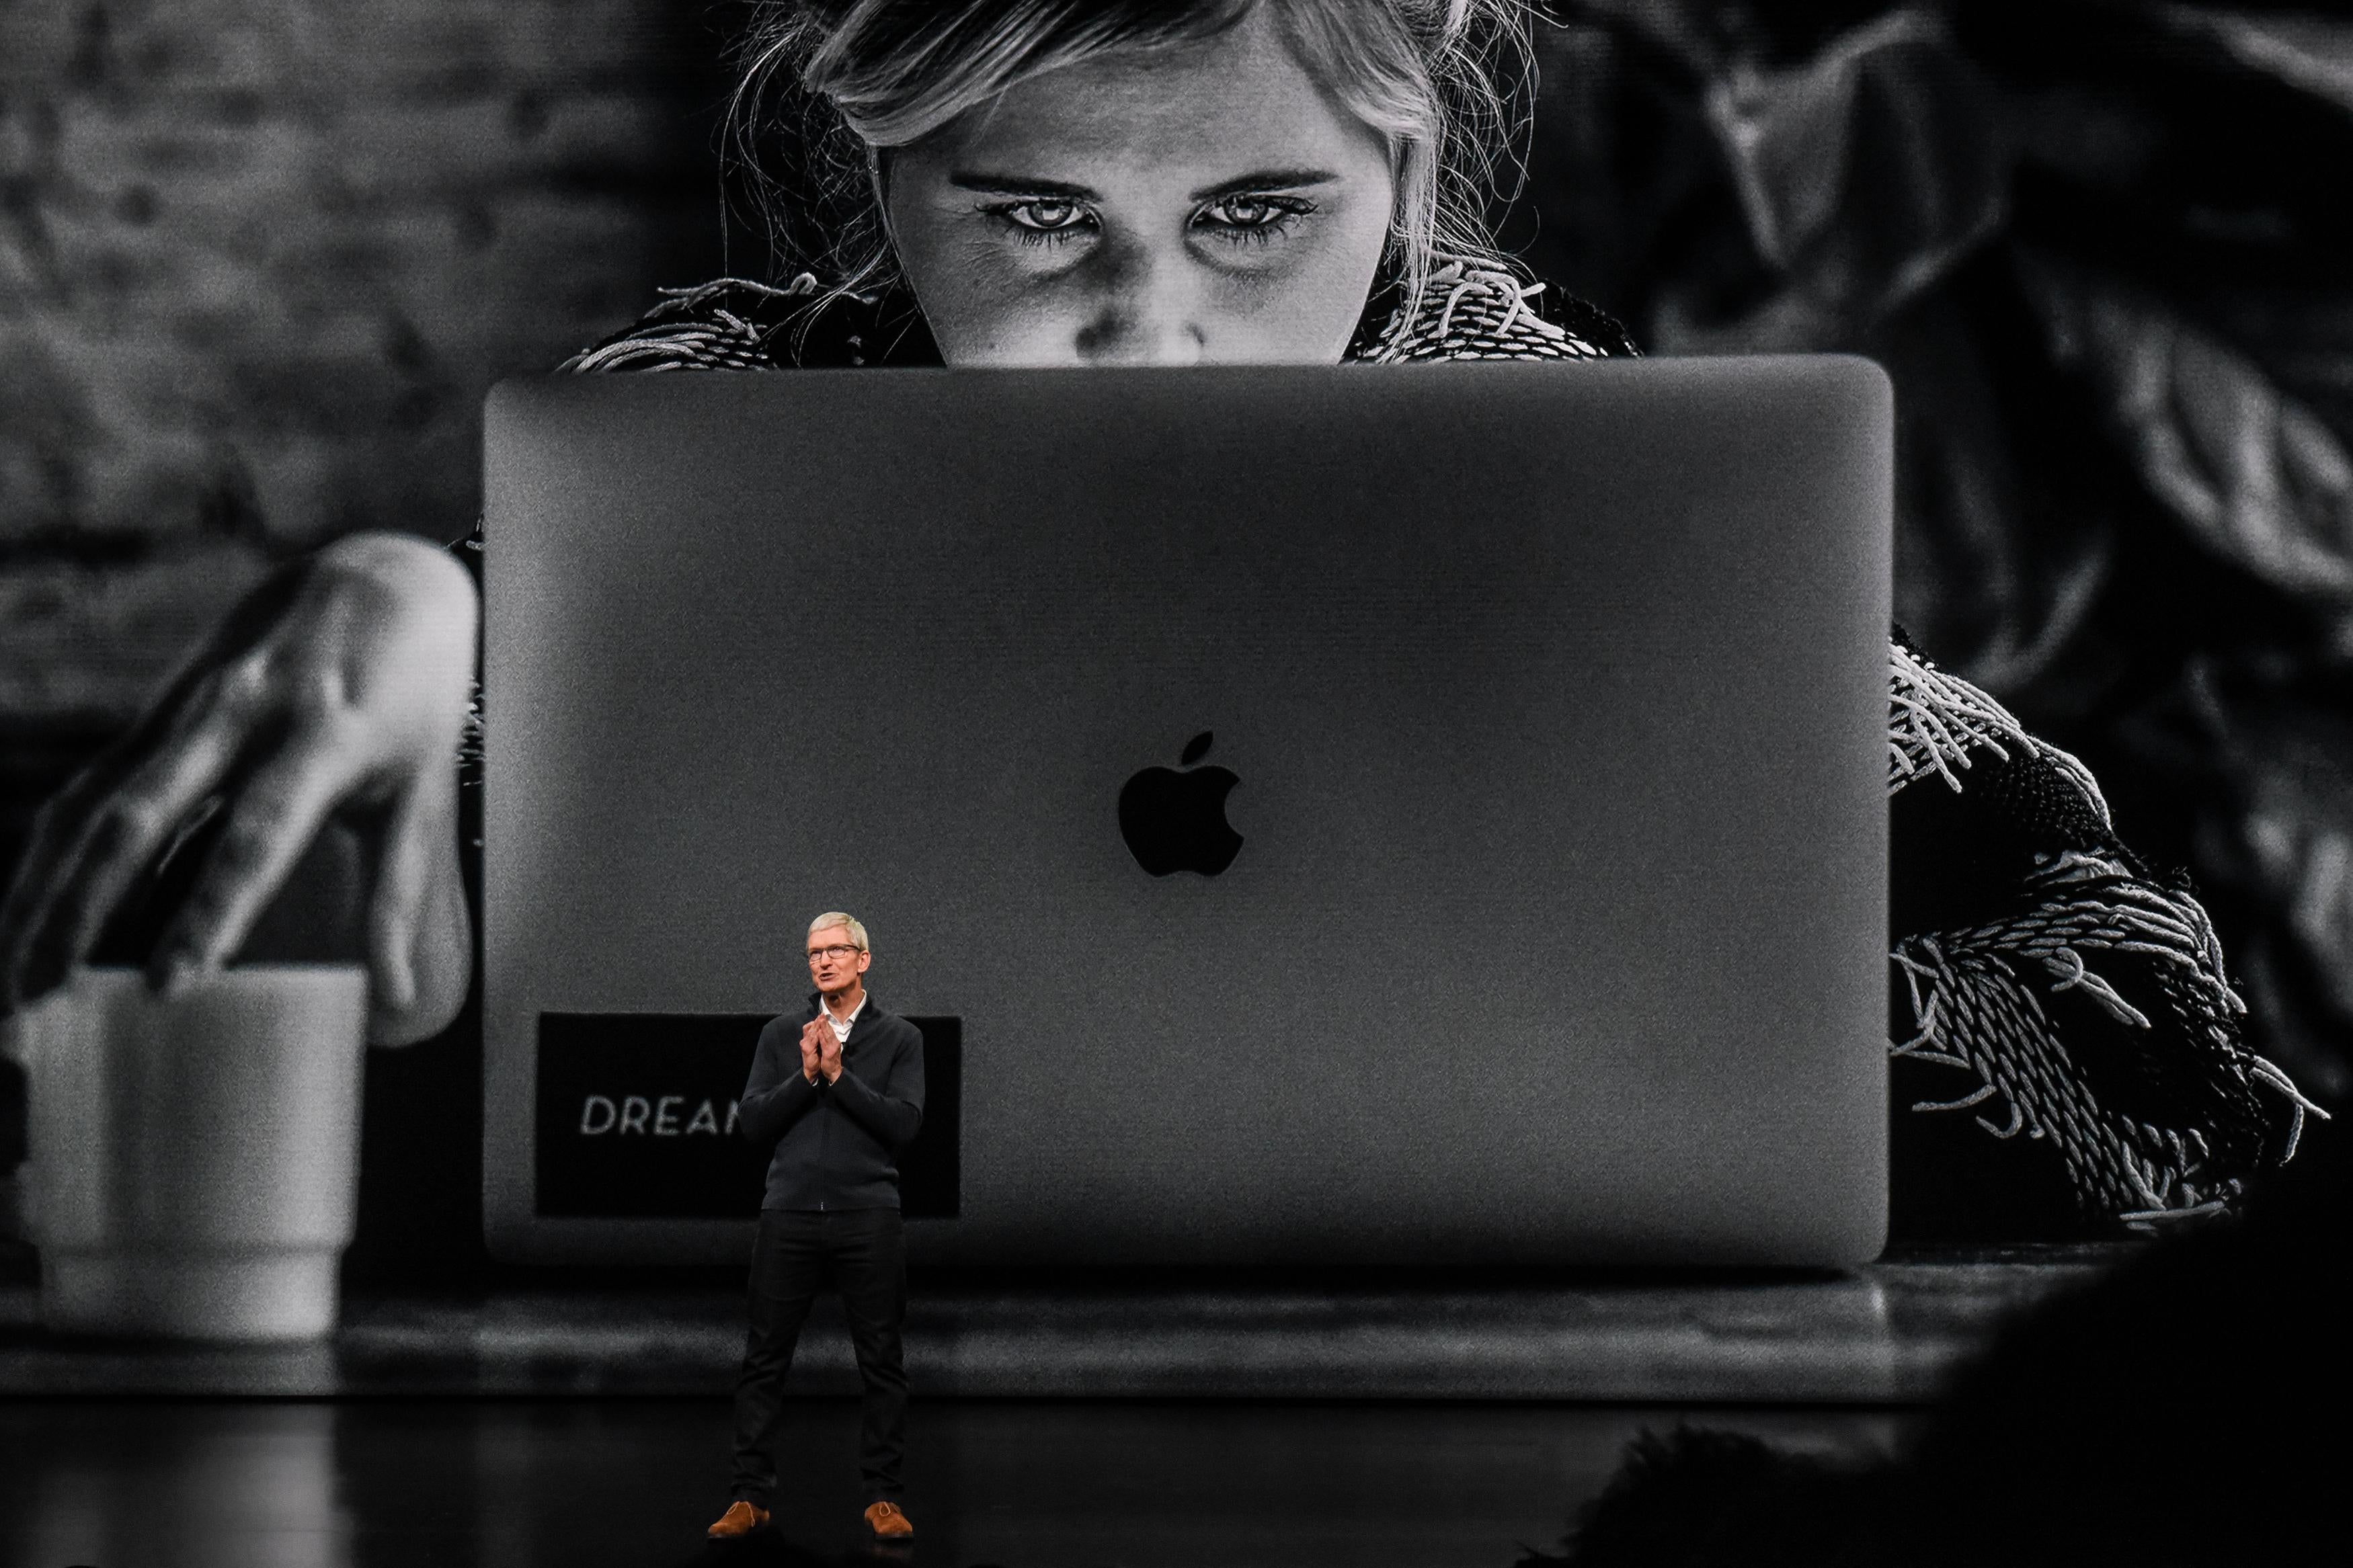 Tim Cook unveils the MacBook Air at an event in New York City.